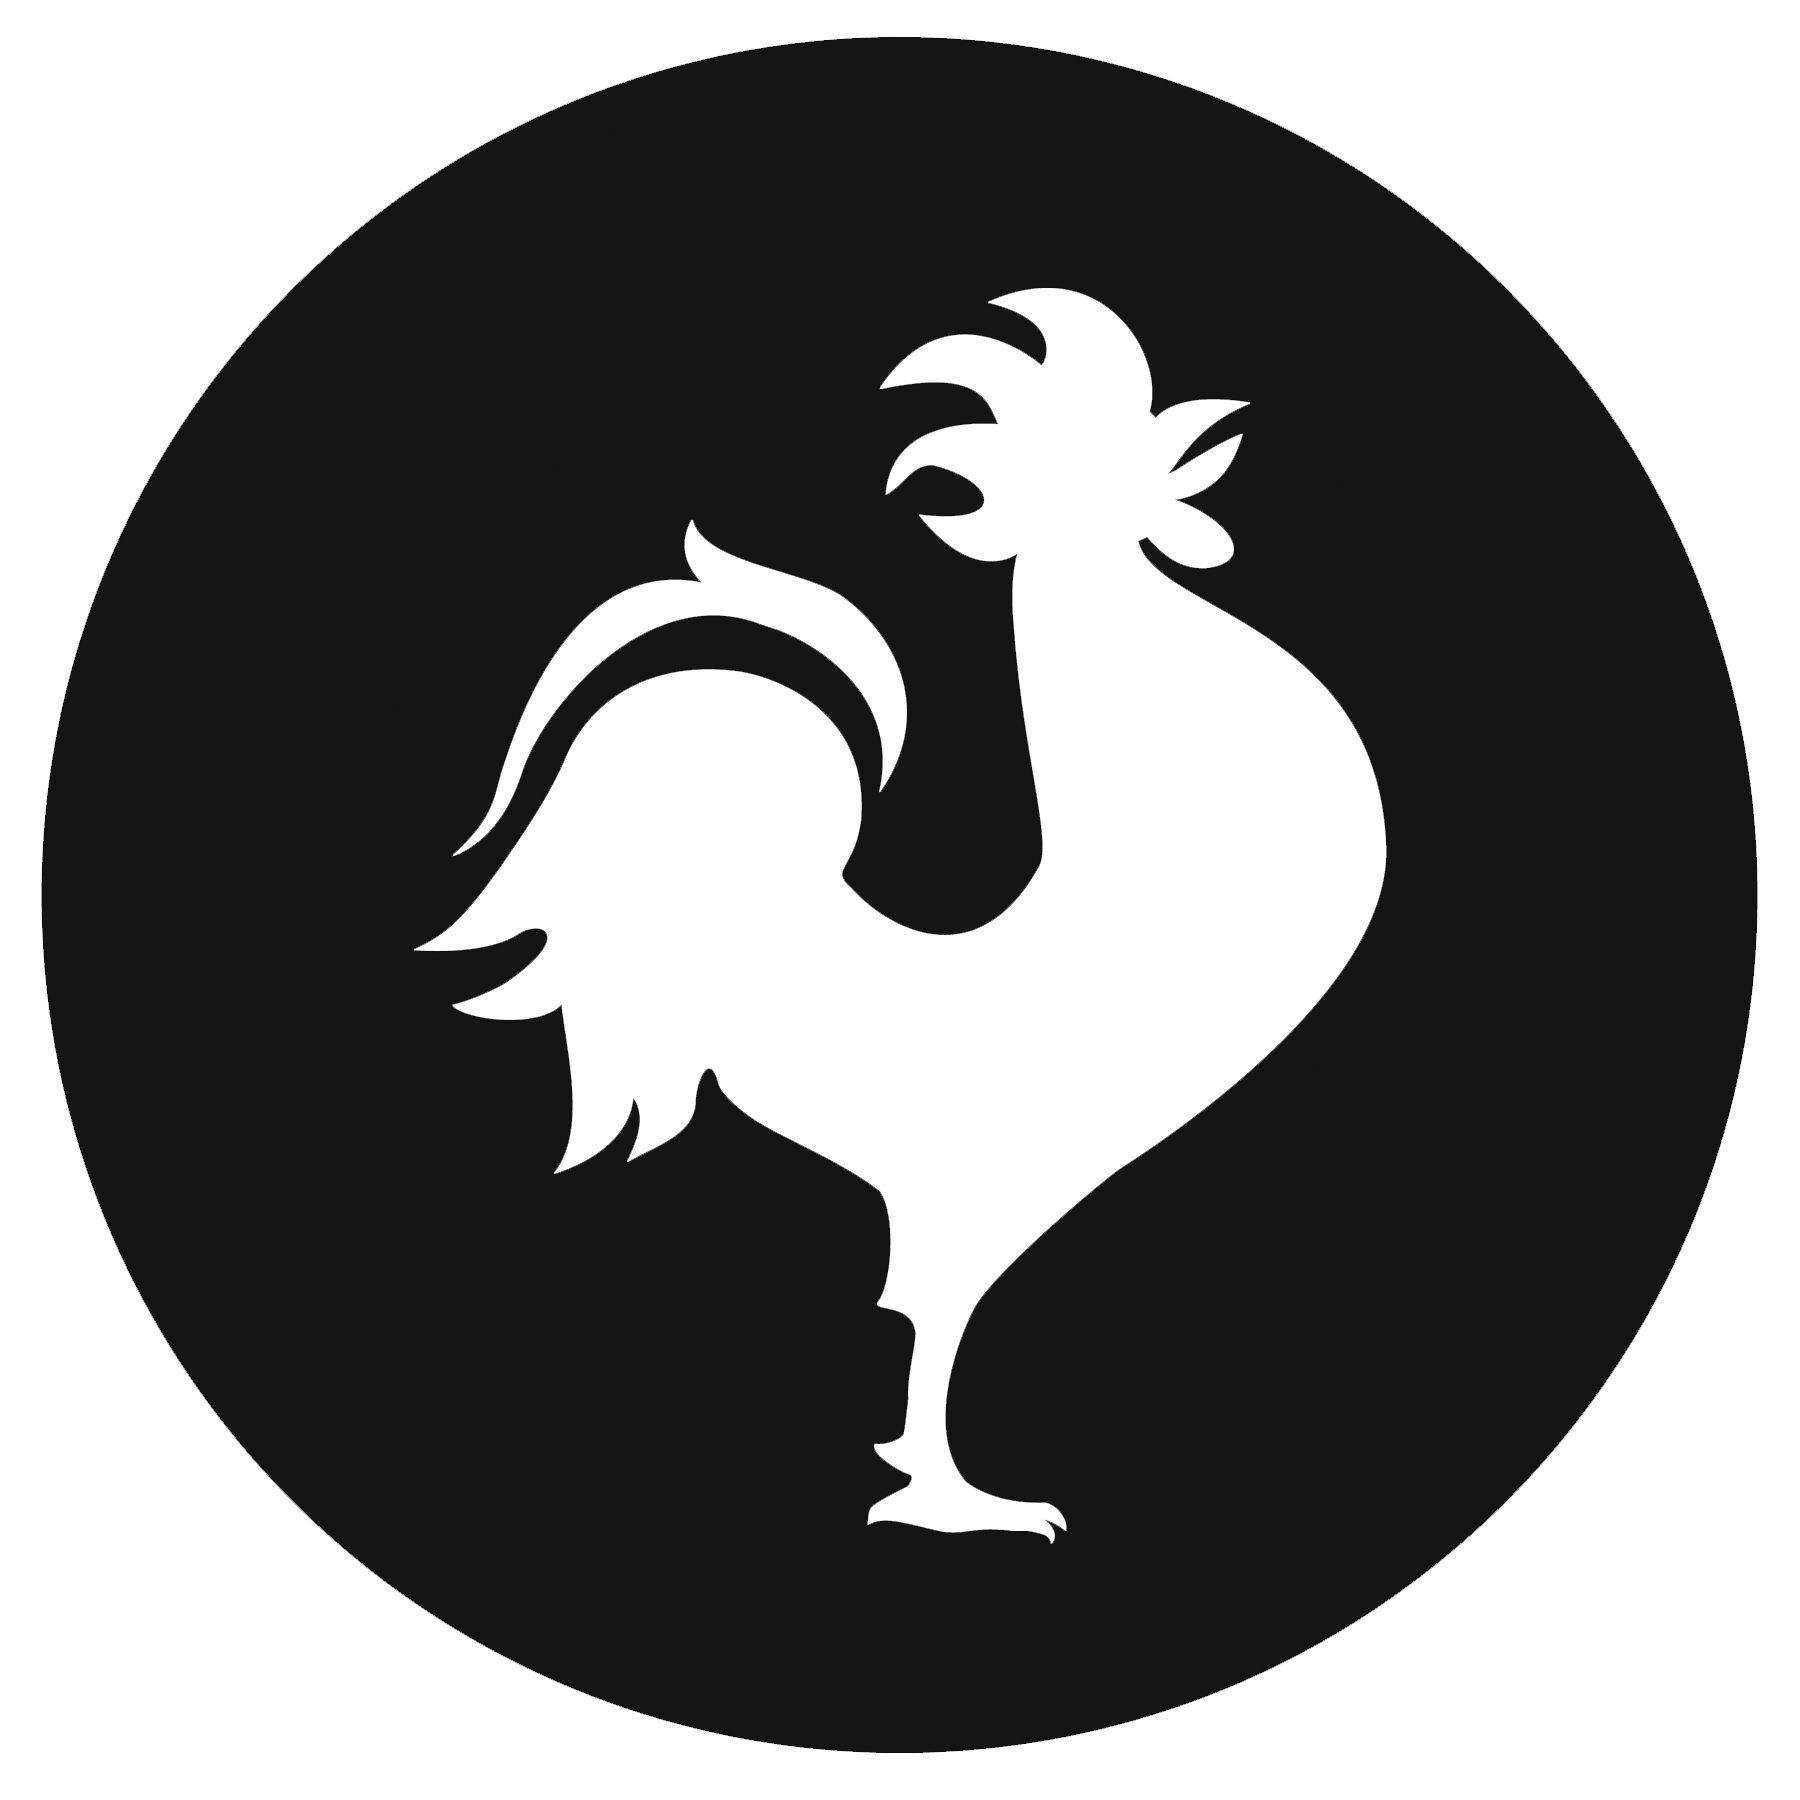 Black and White Rooster Logo - Image result for rooster logo | Logo design | Rooster logo ...